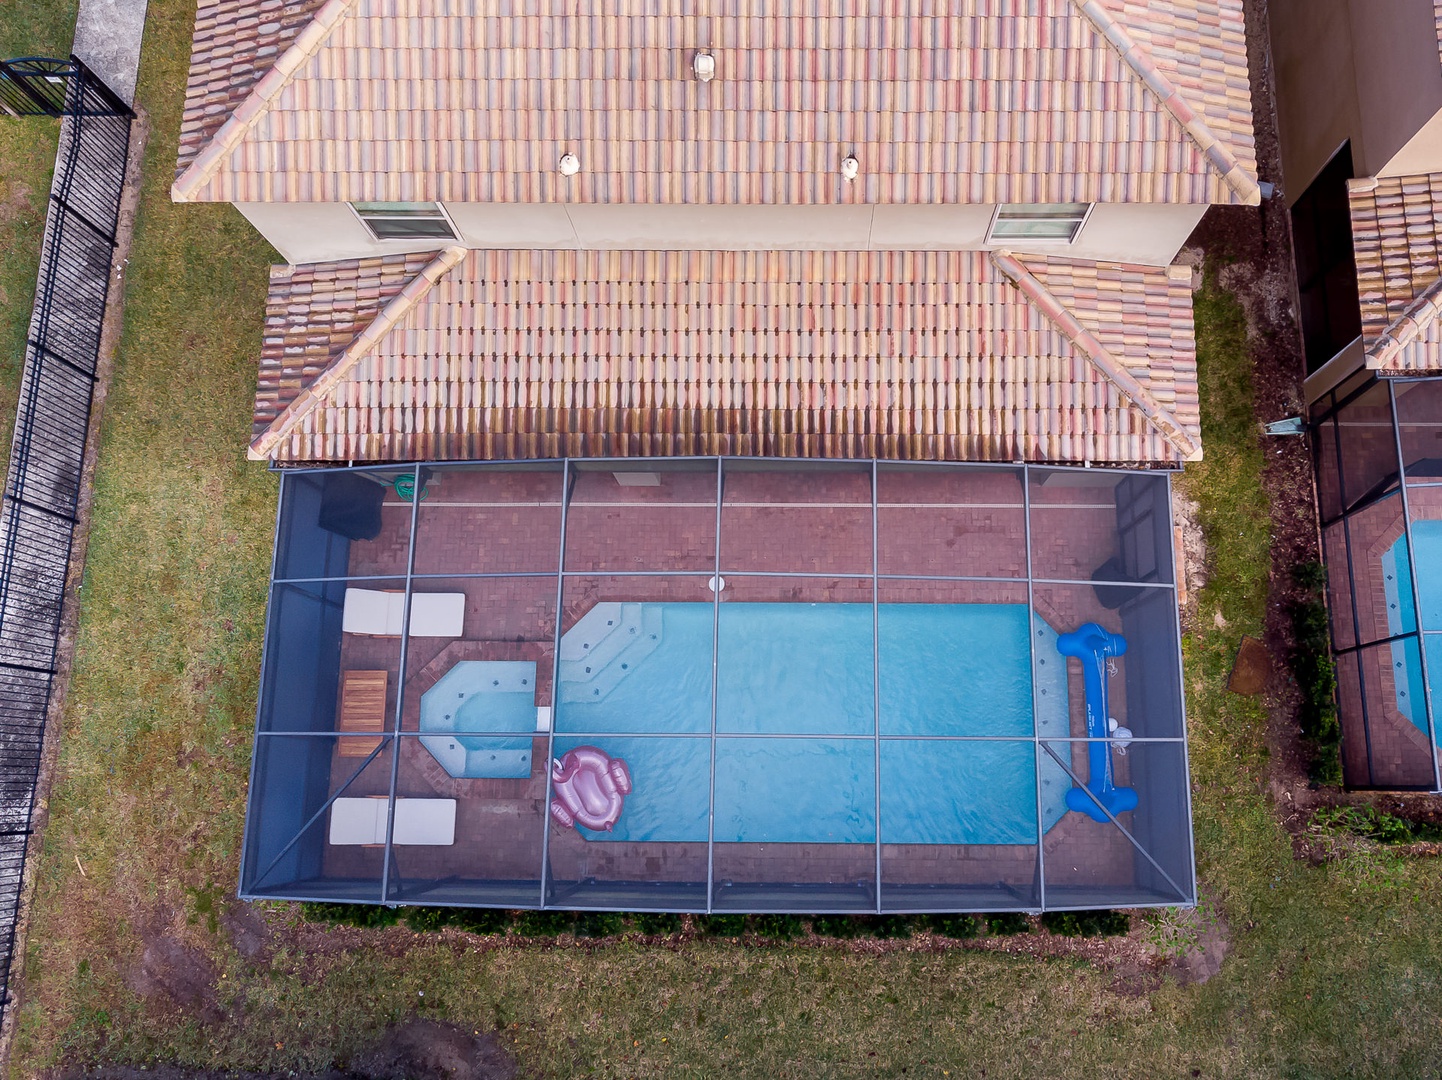 Top view of the house